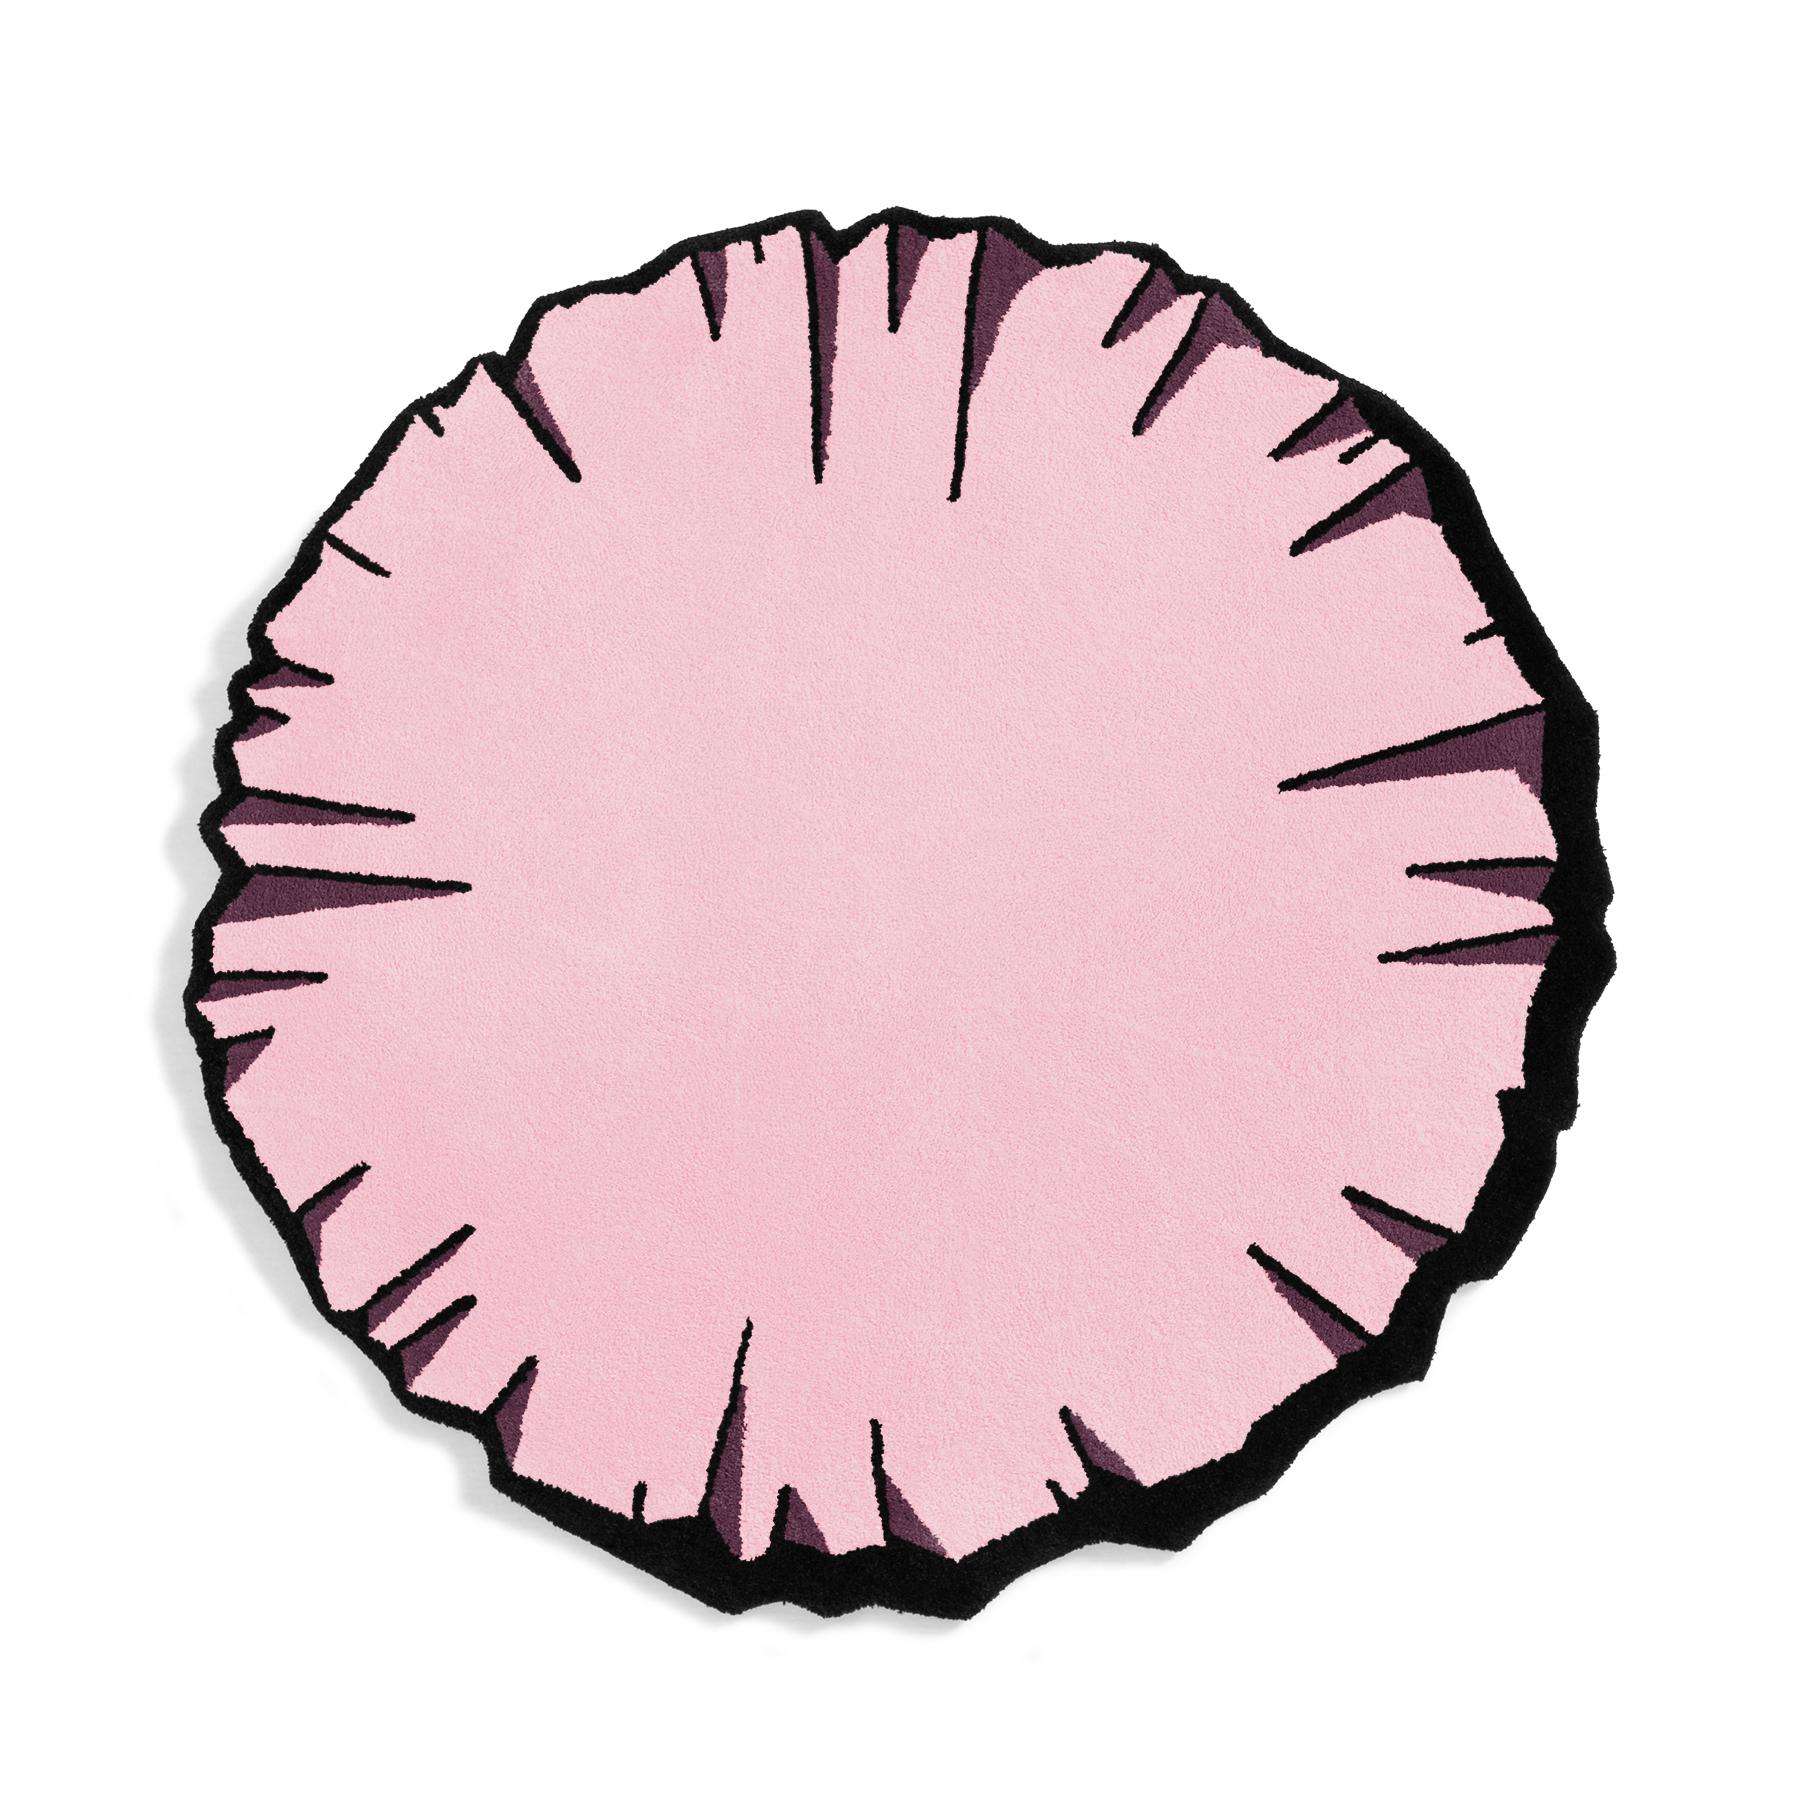 Nylon Round Colorful Crumpled Rug from Graffiti Collection by Paulo Kobylka, Large For Sale